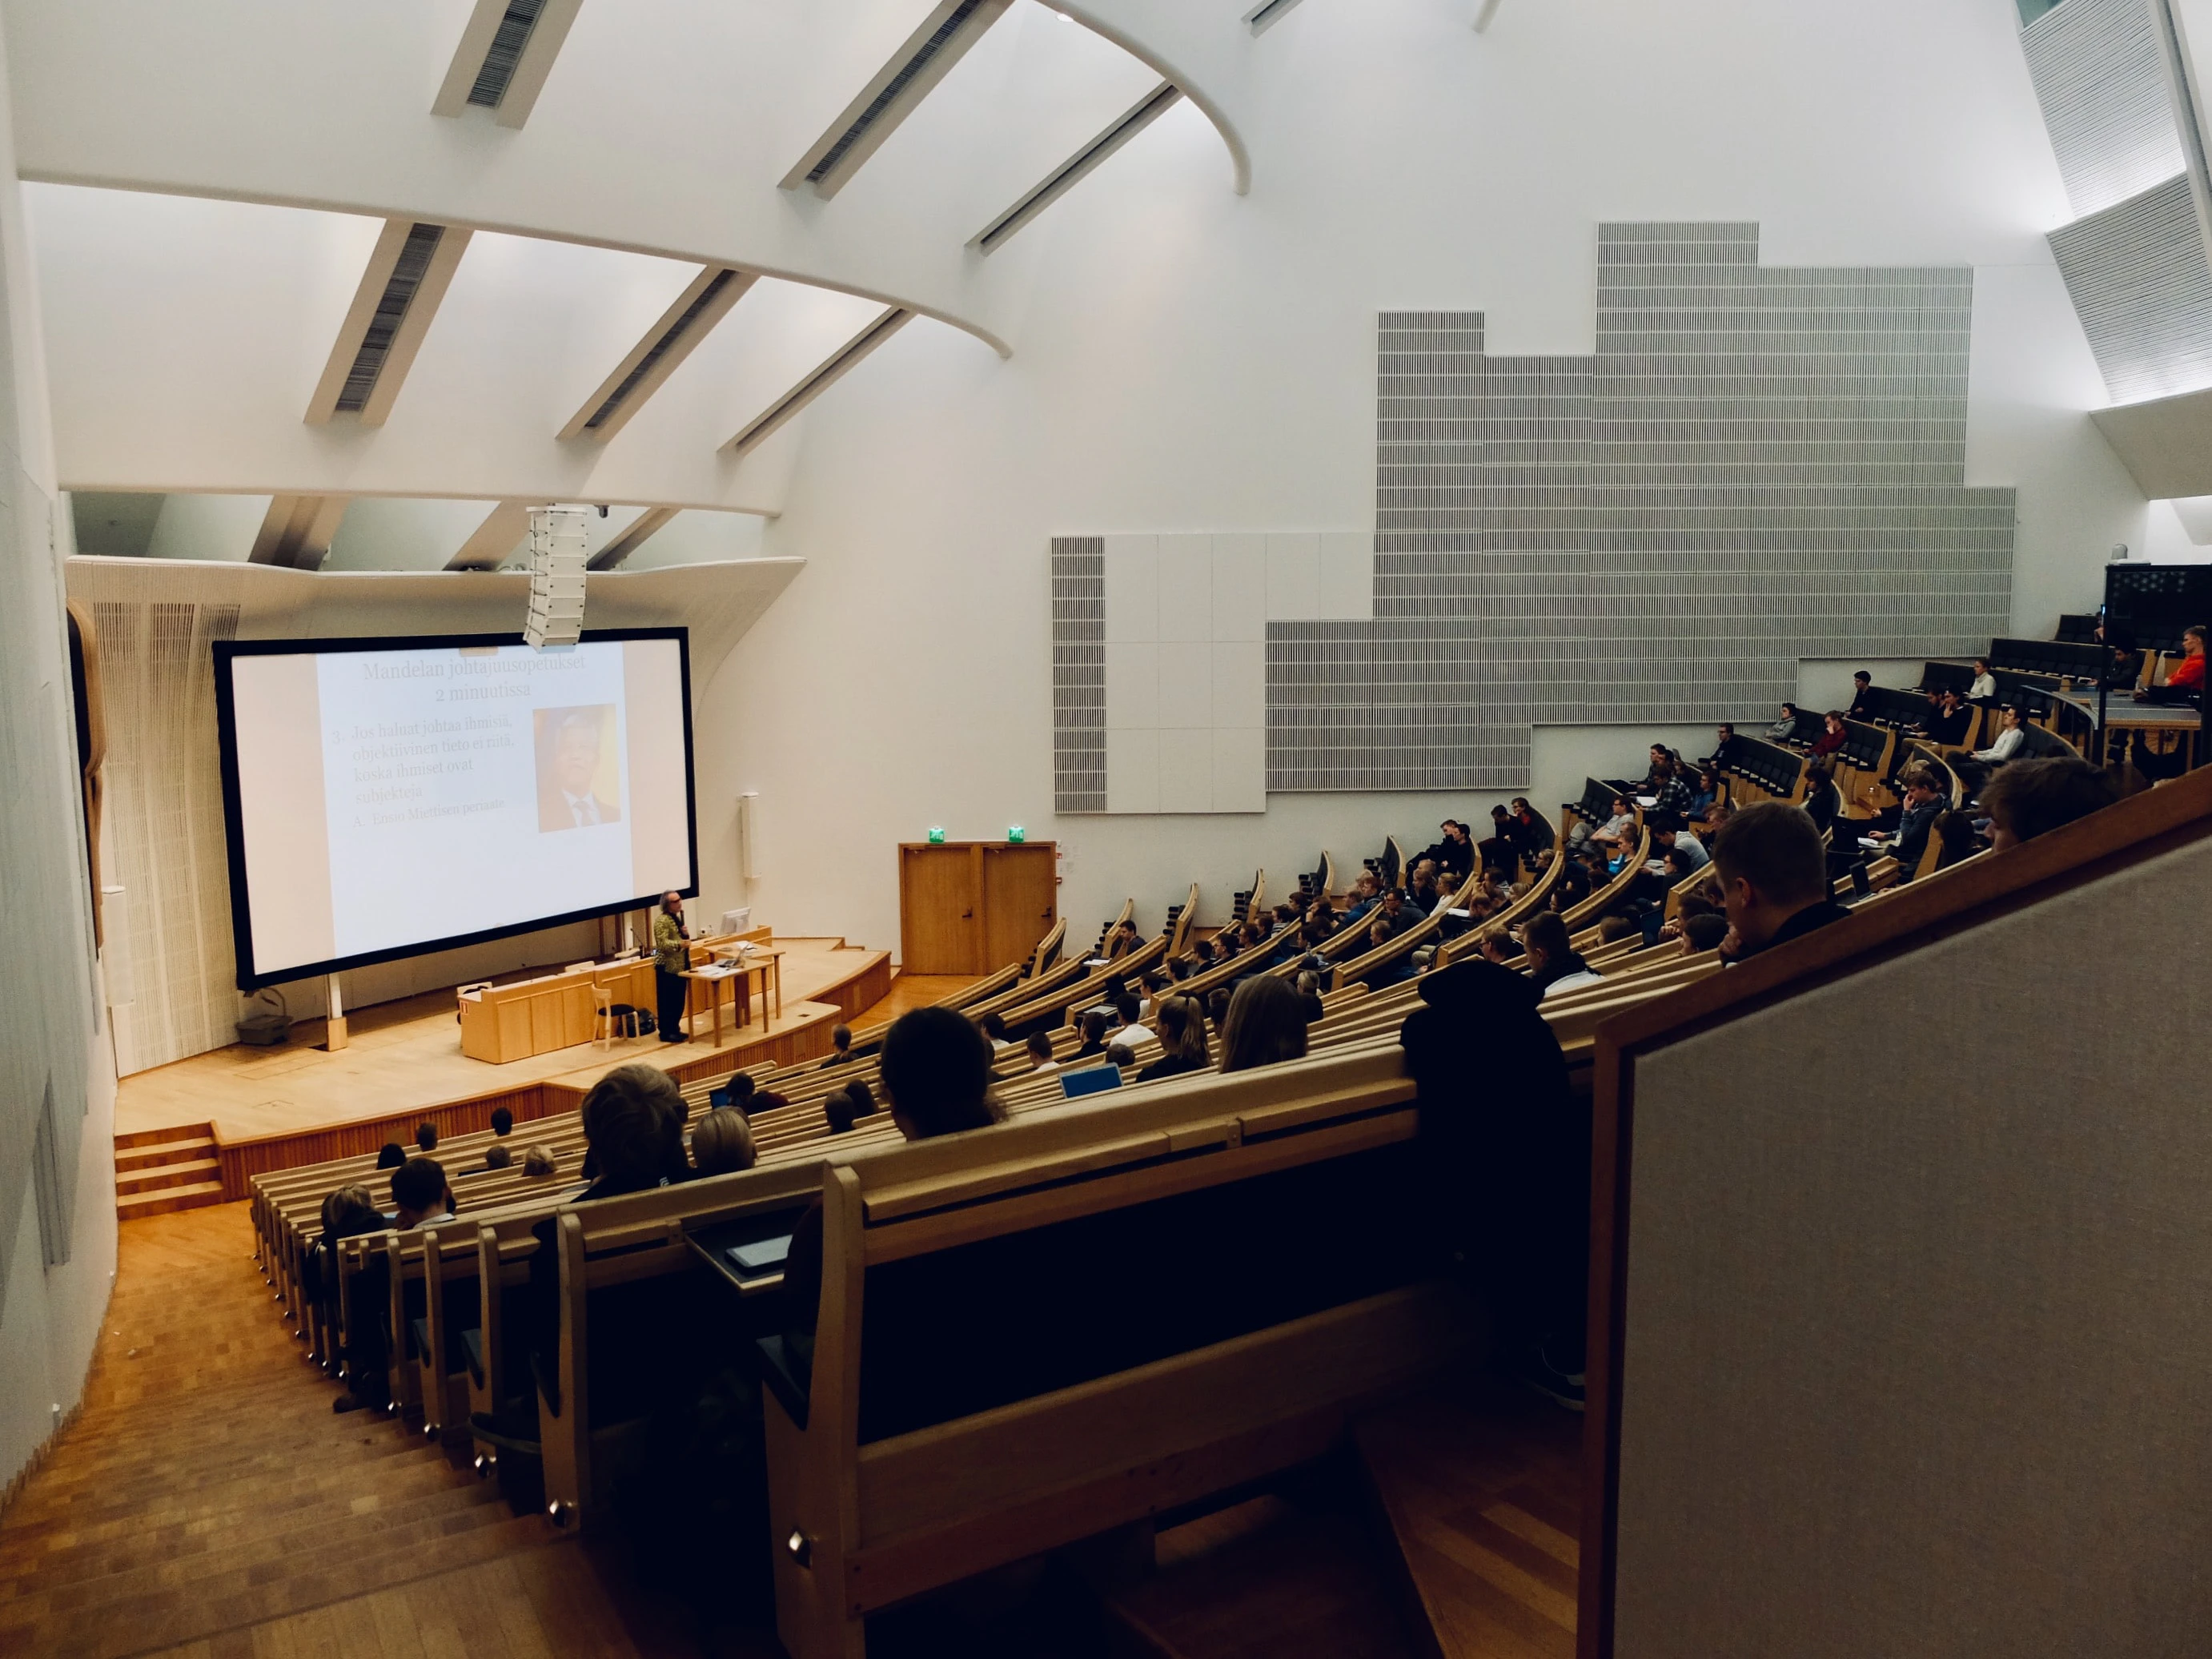 An undergraduate lecture hall